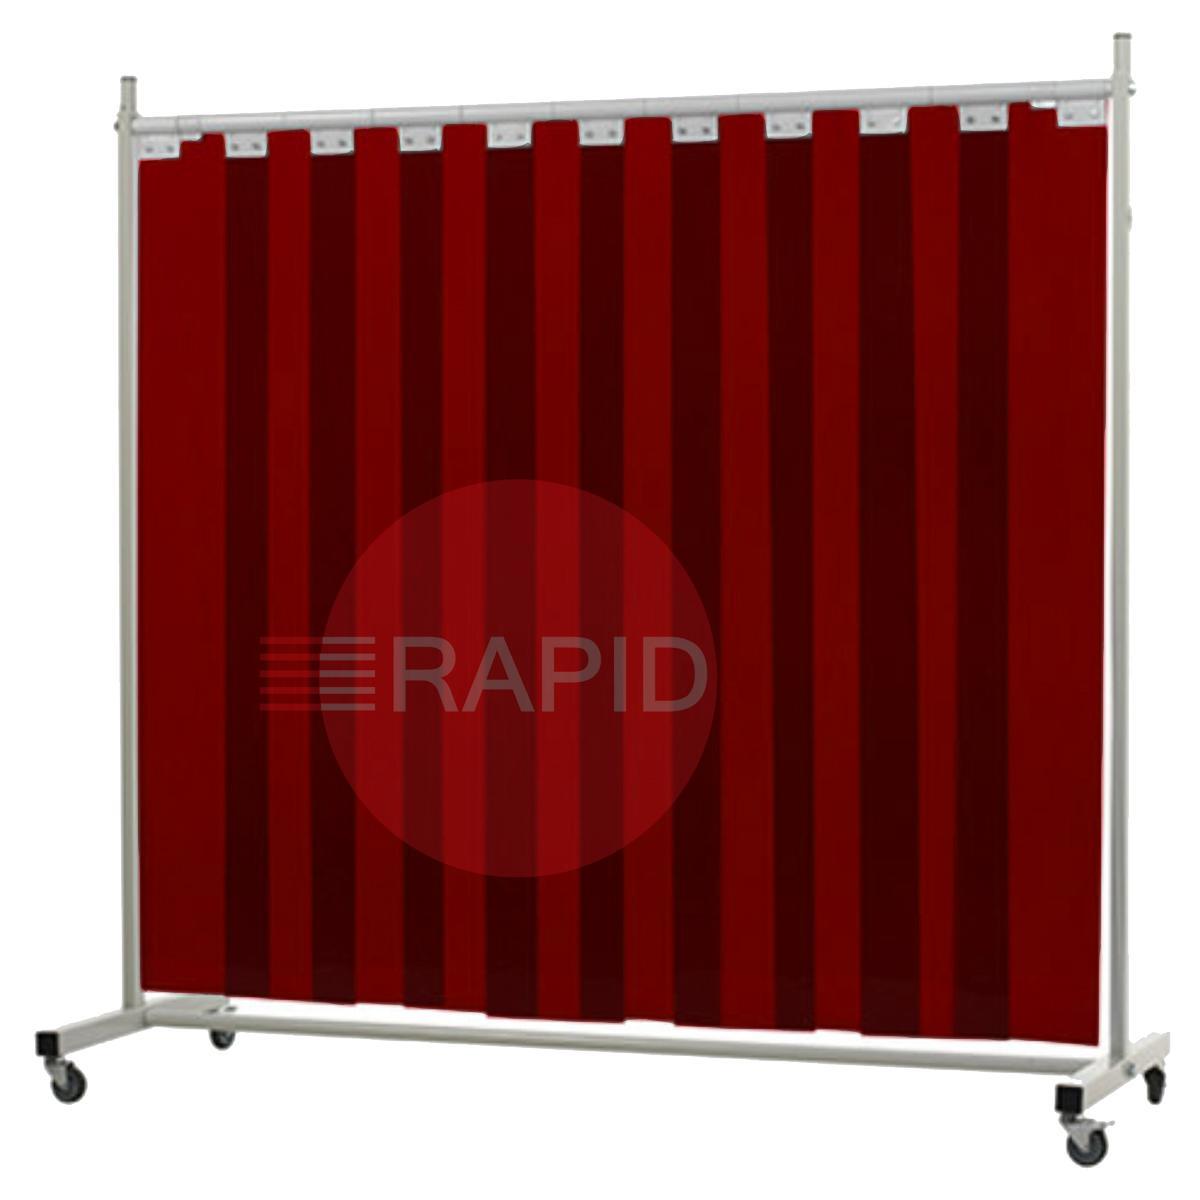 36.32.27  CEPRO Robusto Single Welding Screen with Bronze-CE Strips - 2.2m Wide x 2.1m High, Approved EN 25980